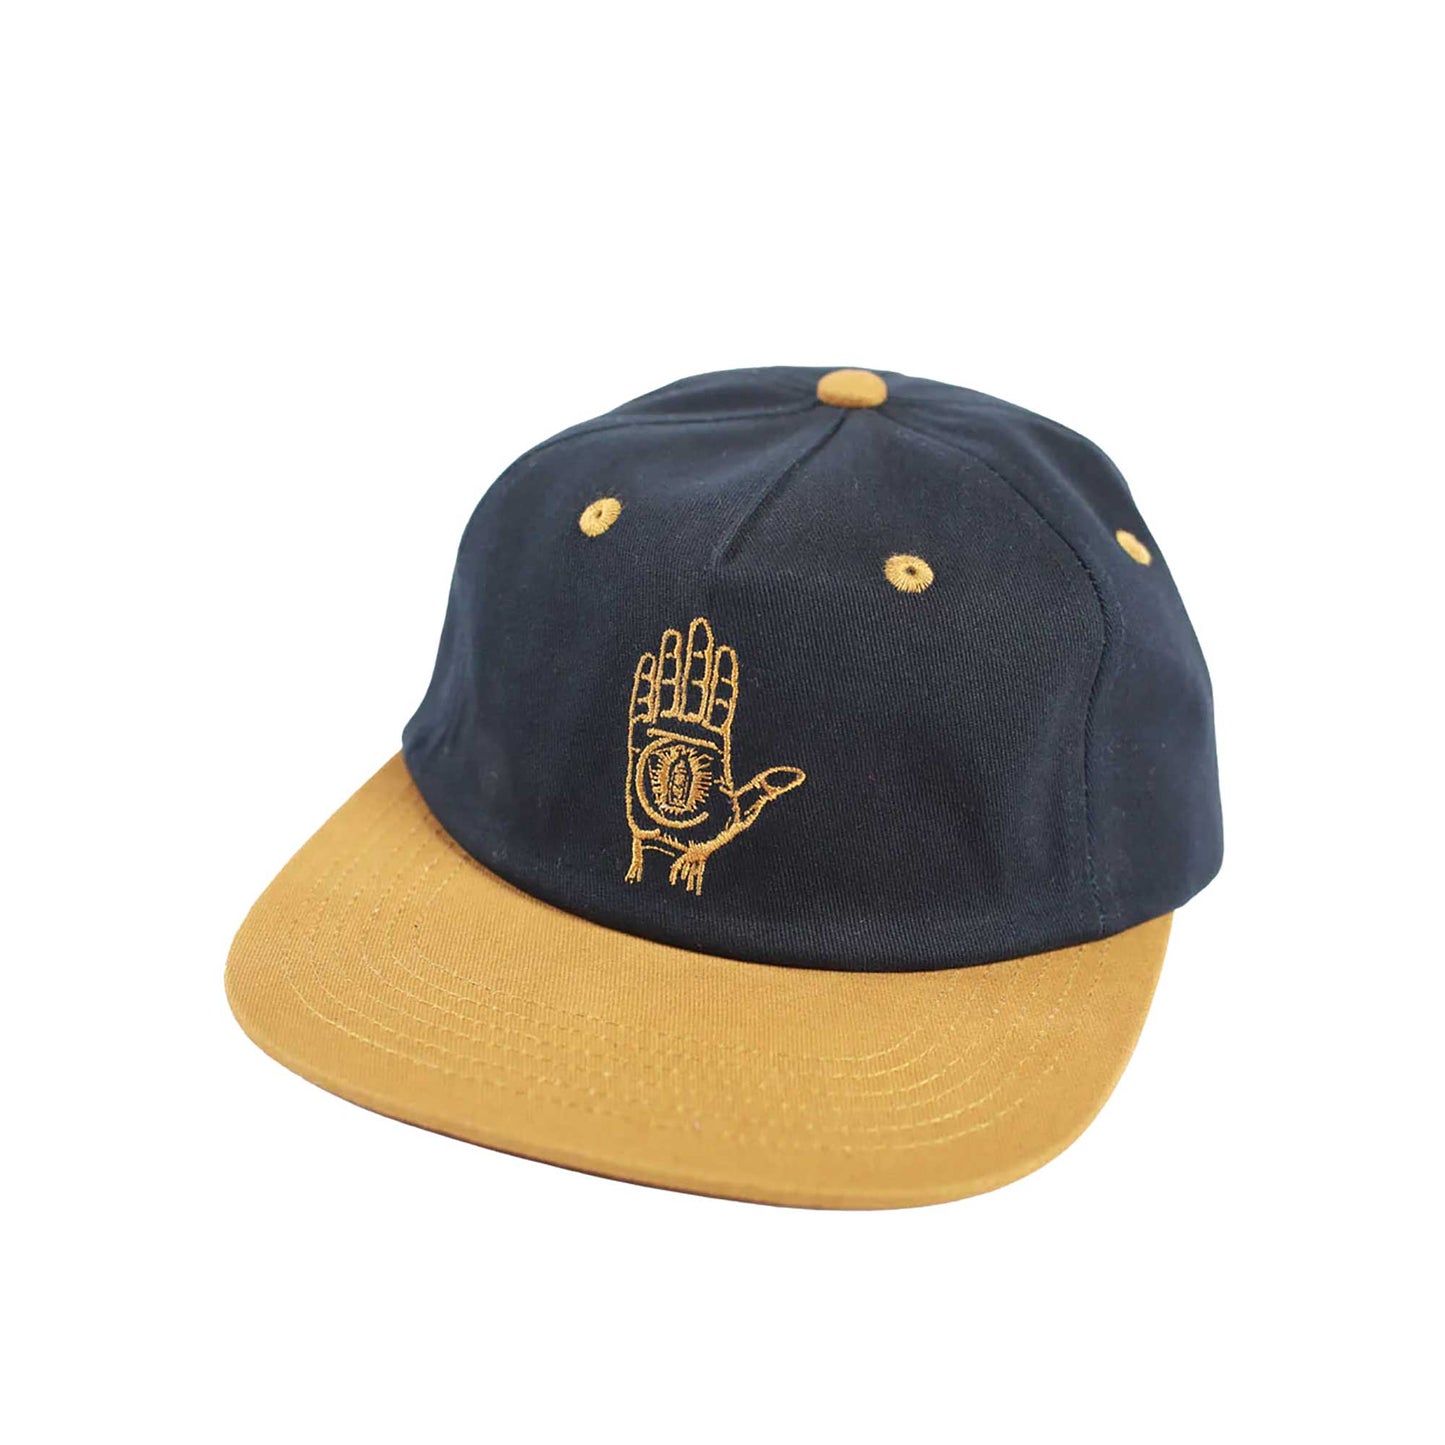 Theories Hand Of Theories Strapback, navy/gold - Tiki Room Skateboards - 1